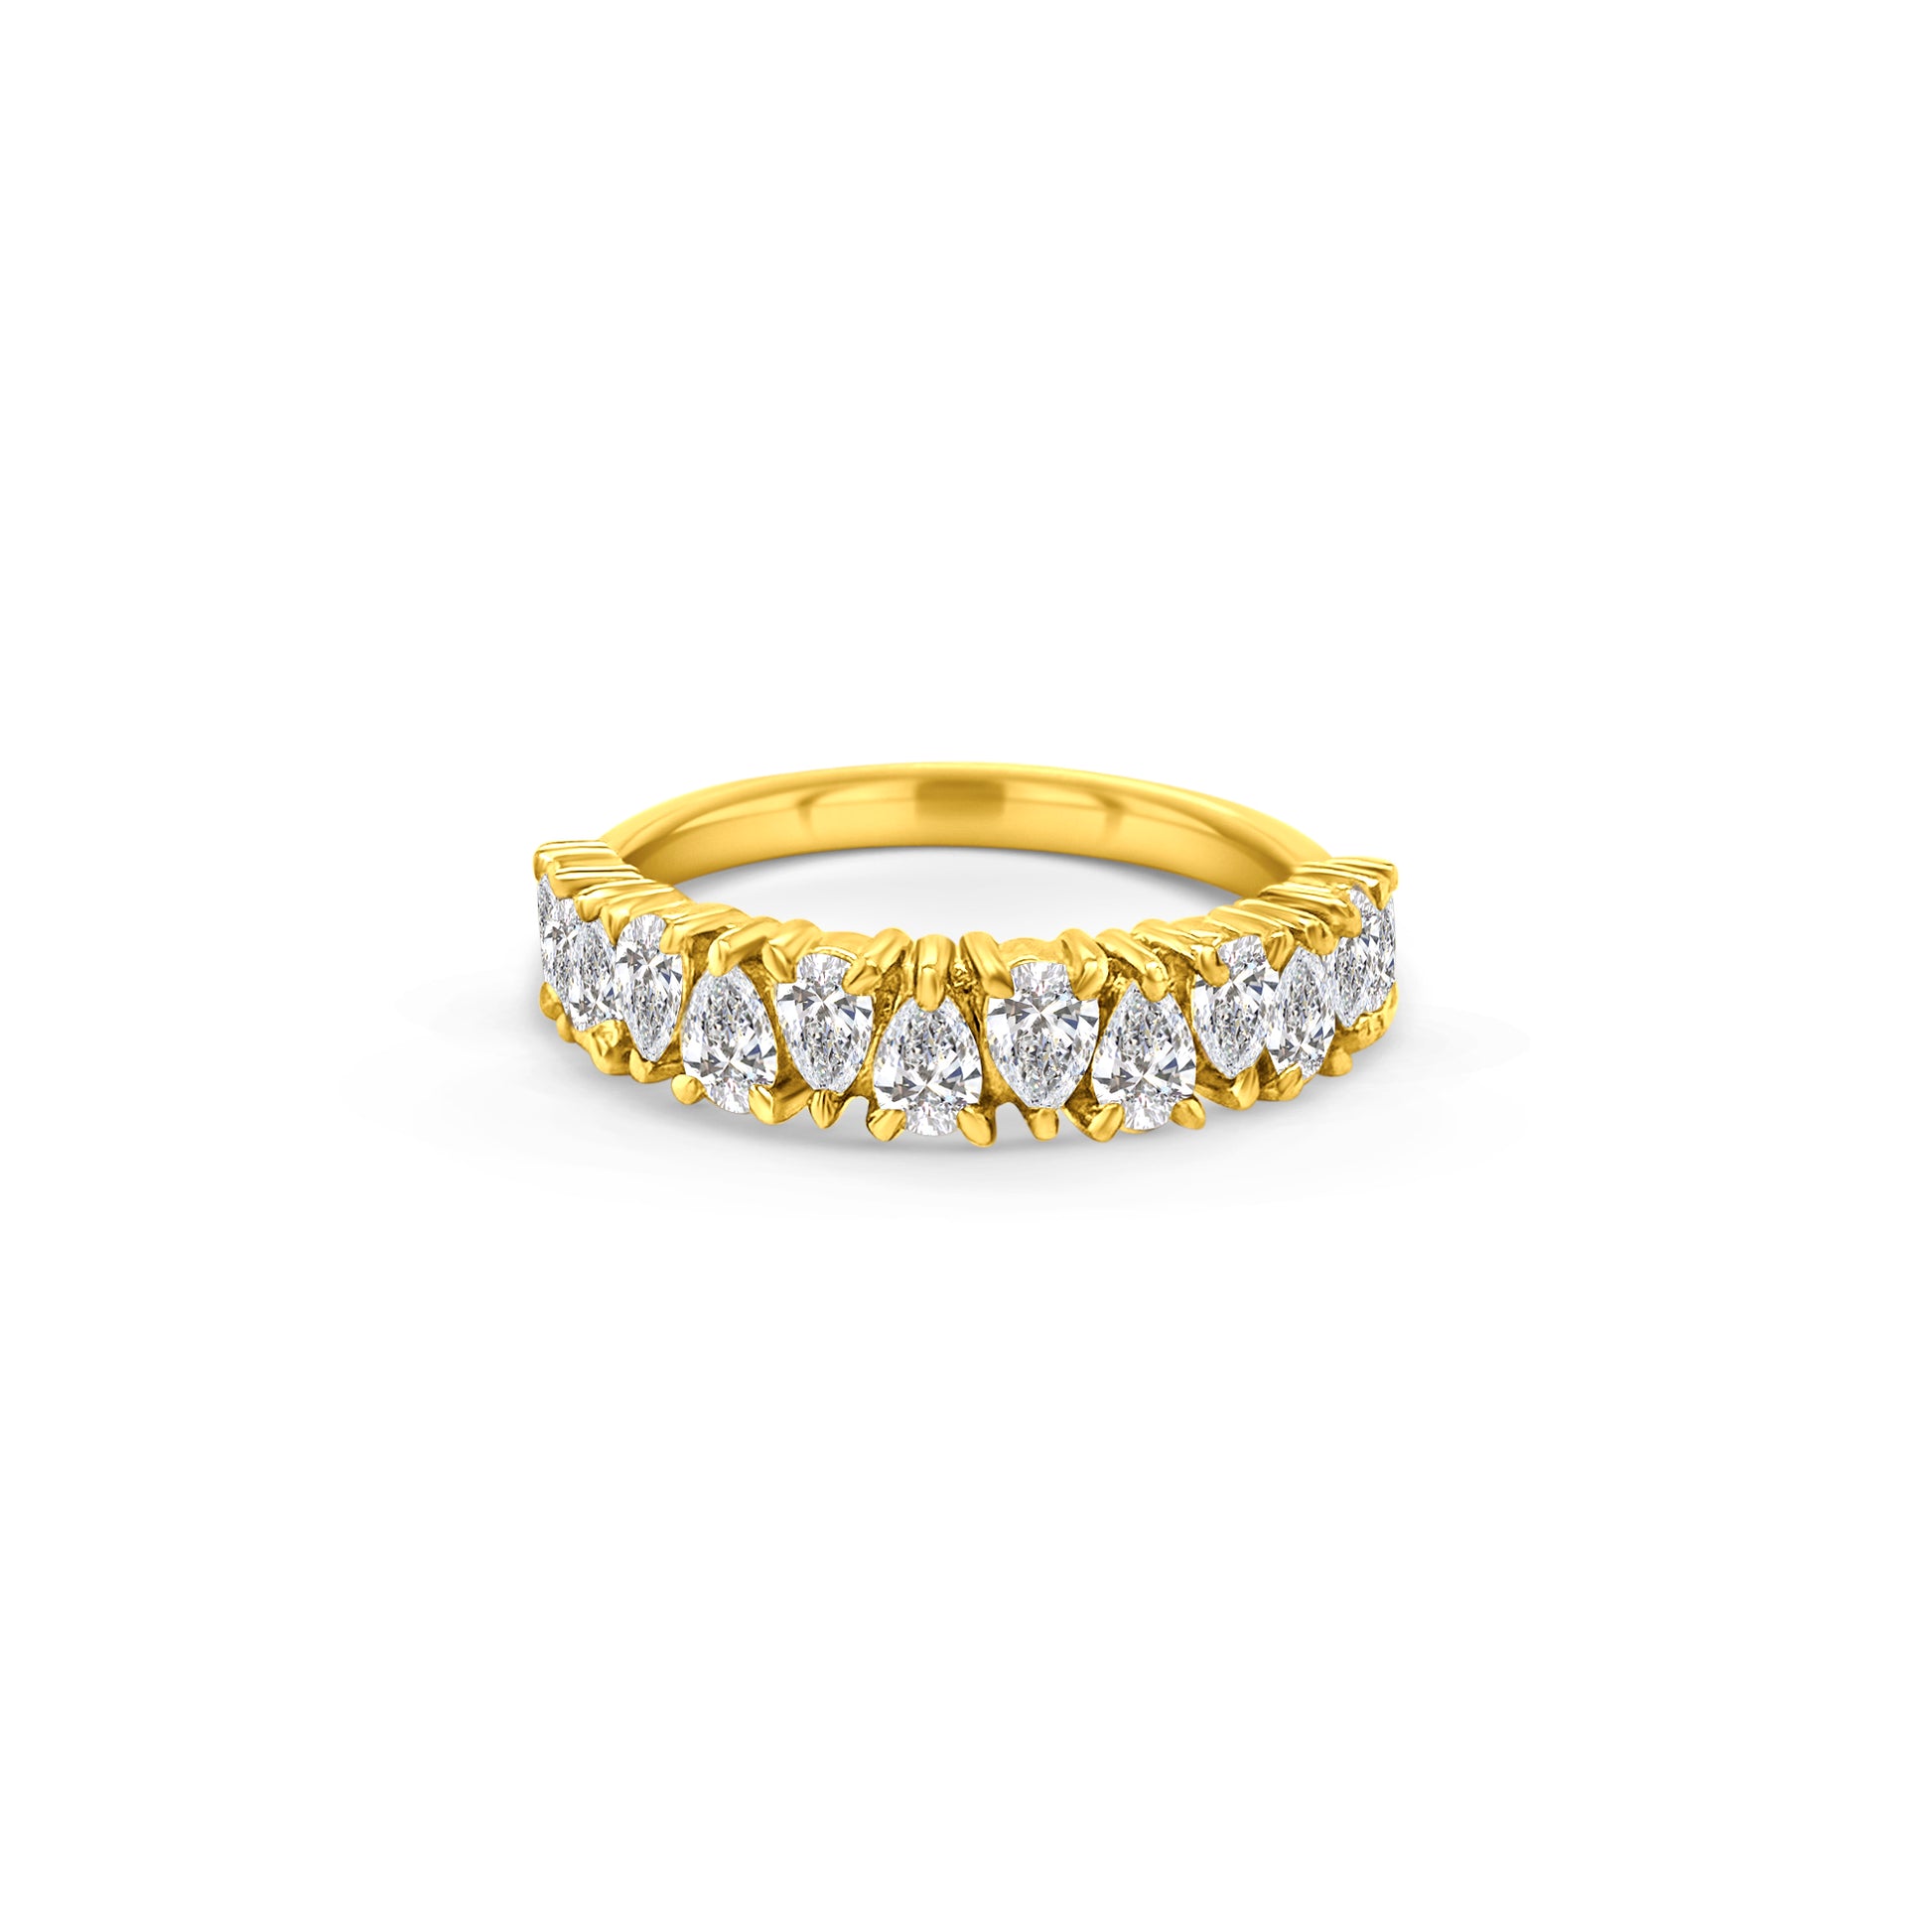 A pear-shaped half eternity diamond ring, perfect for adding elegance to any ensemble. Featuring shimmering diamonds set along the band, this ring exudes timeless charm and sophistication. Ideal for both everyday wear and special occasions, it effortlessly captures the essence of everlasting love and style.